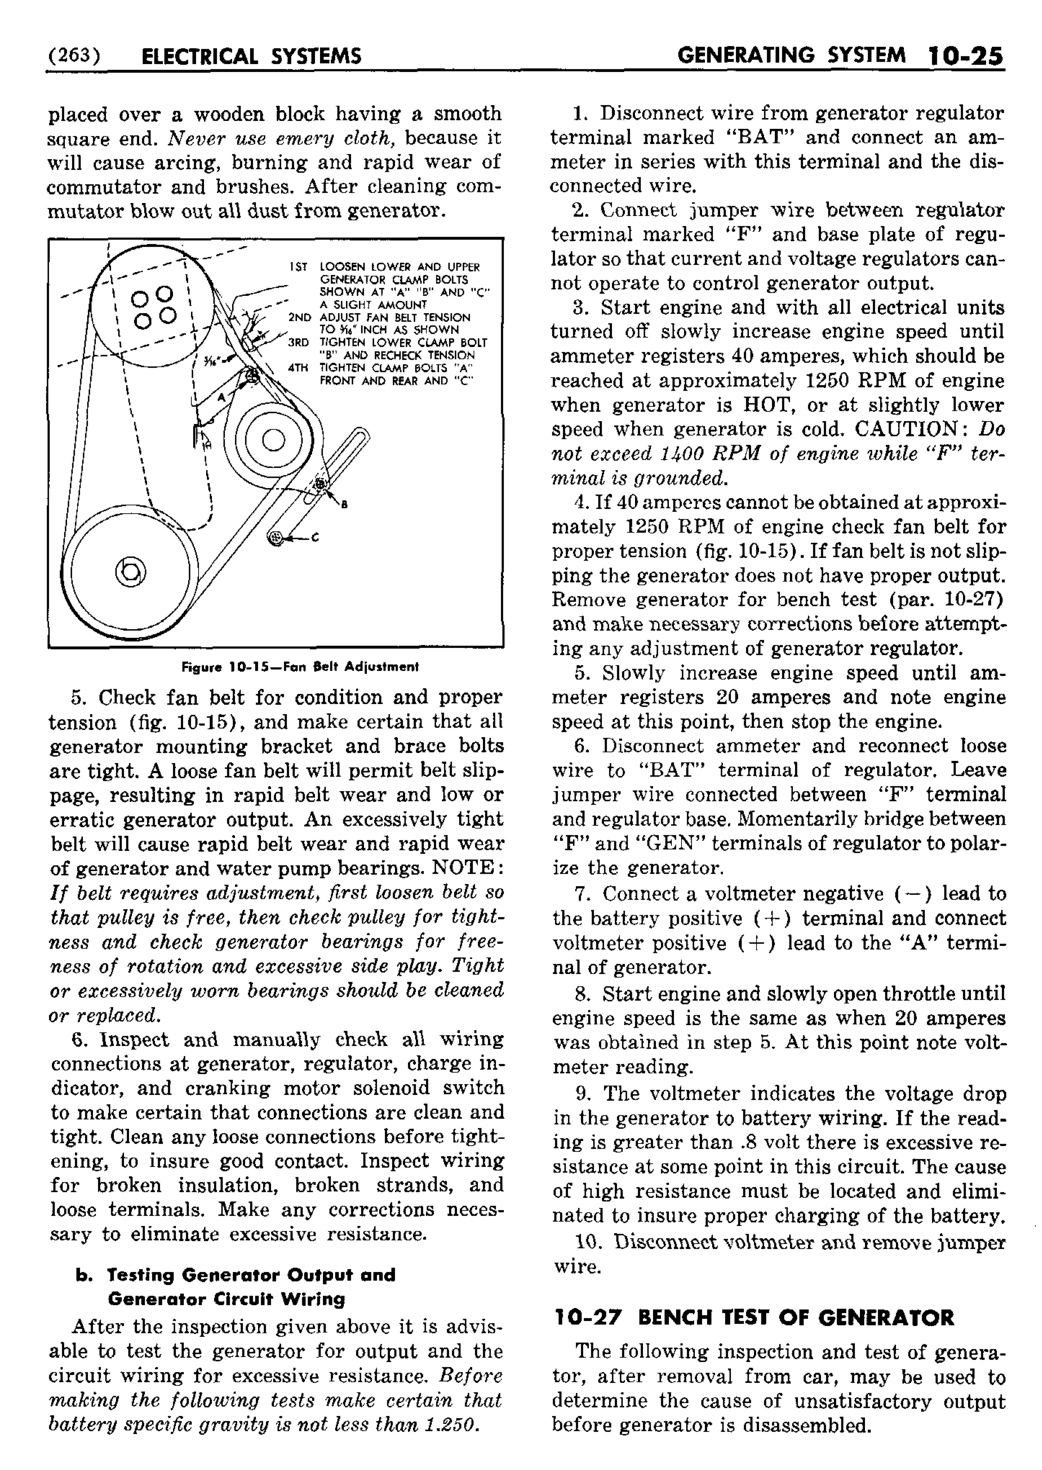 n_11 1950 Buick Shop Manual - Electrical Systems-025-025.jpg